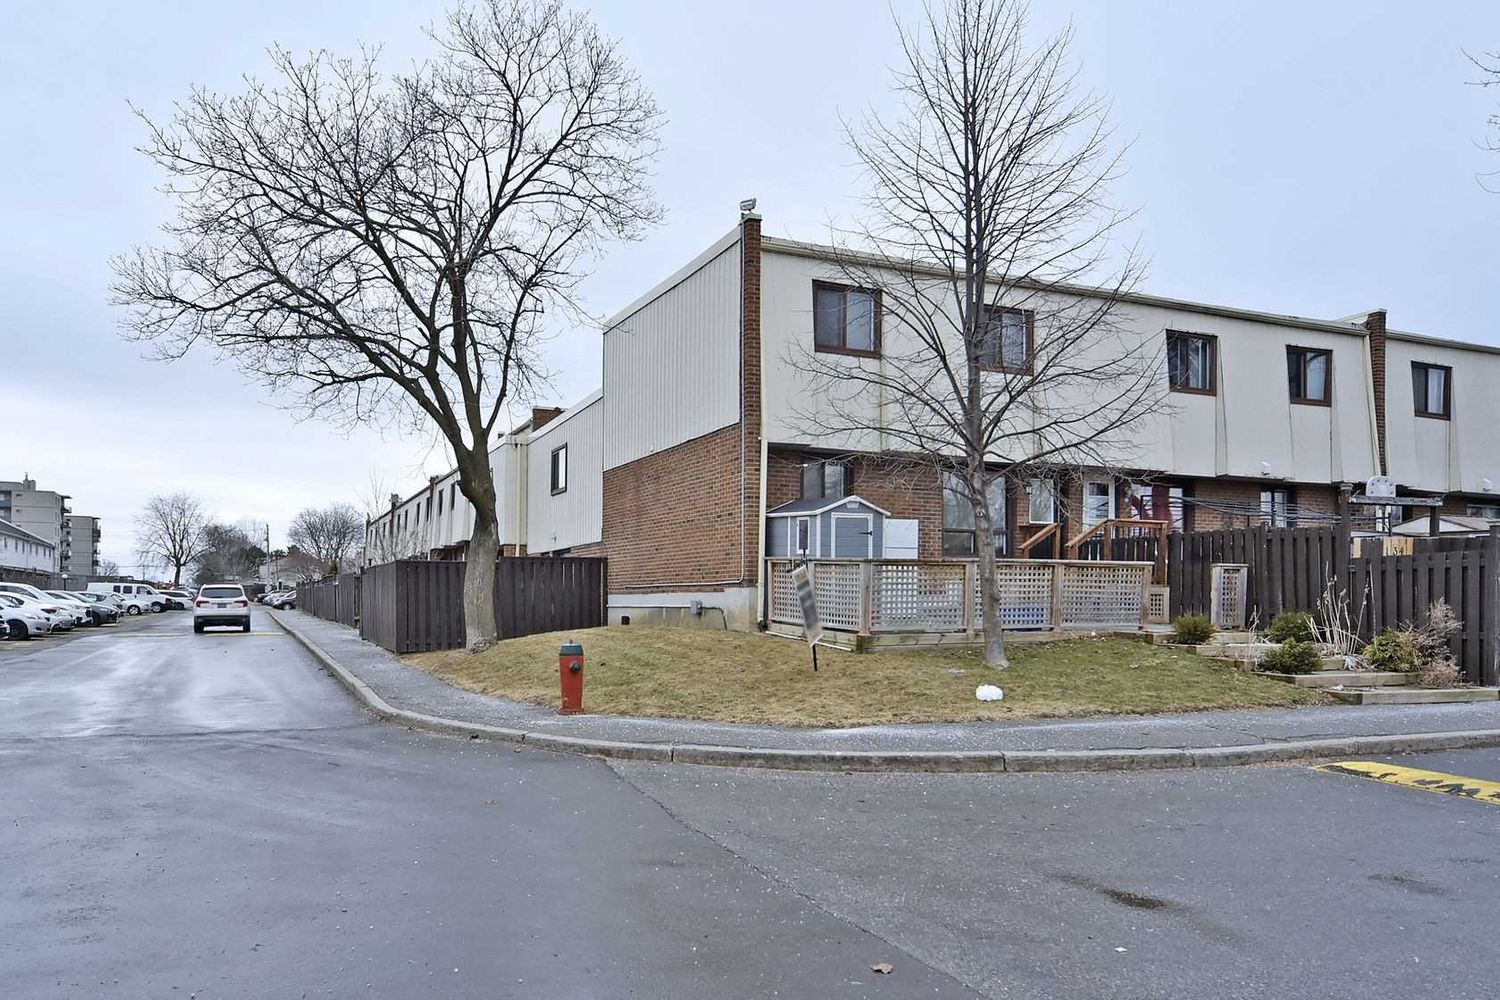 1100 Oxford Street. 1100 Oxford Street Townhomes is located in  Oshawa, Toronto - image #1 of 2